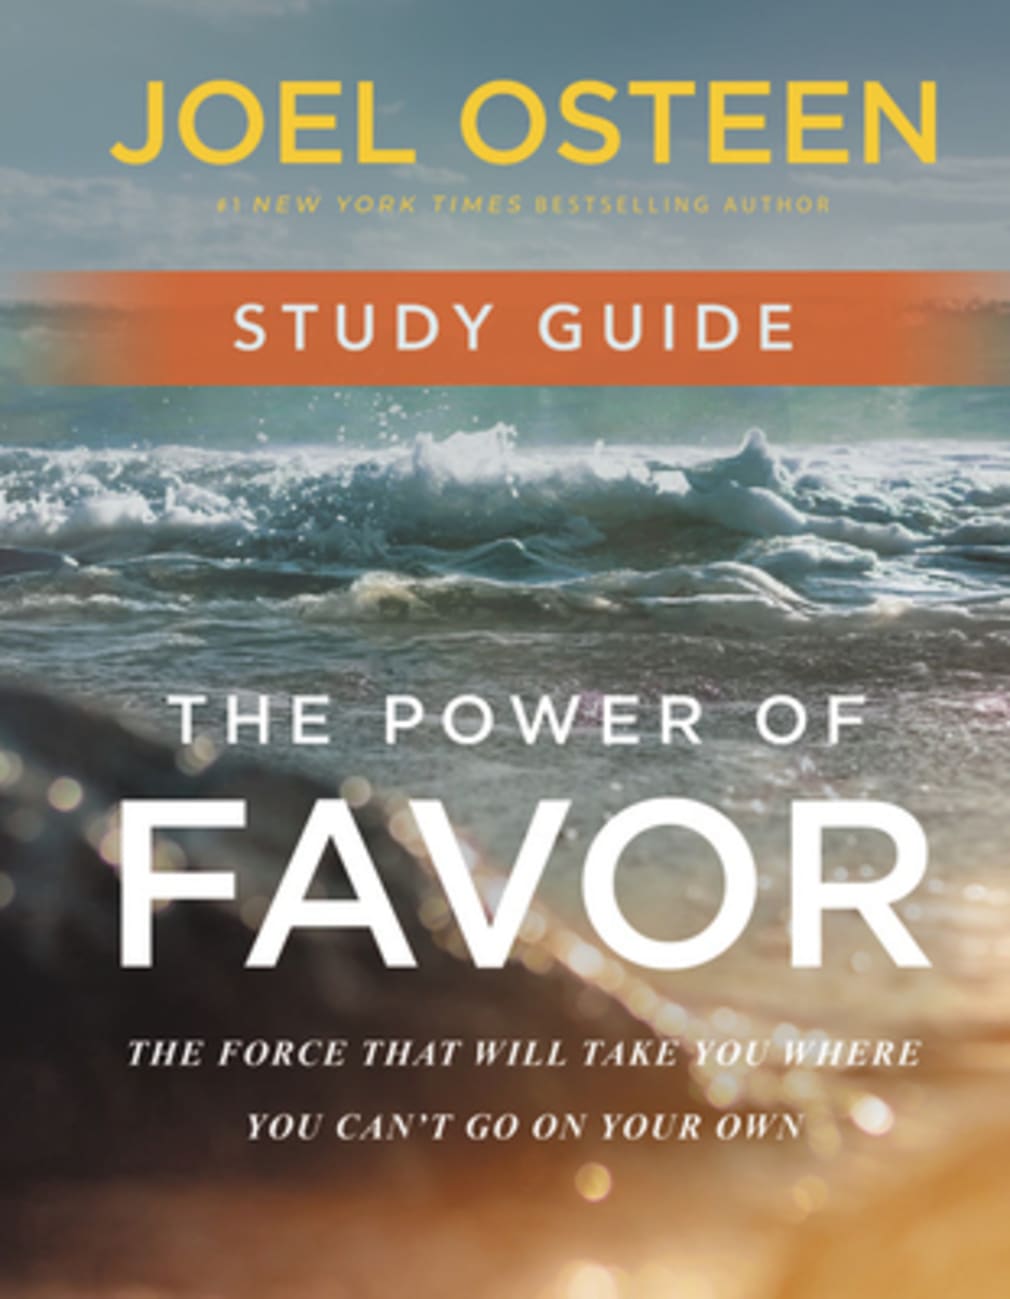 The Power of Favor: The Force That Will Take You Where You Can't Go on Your Own (Study Guide) Paperback